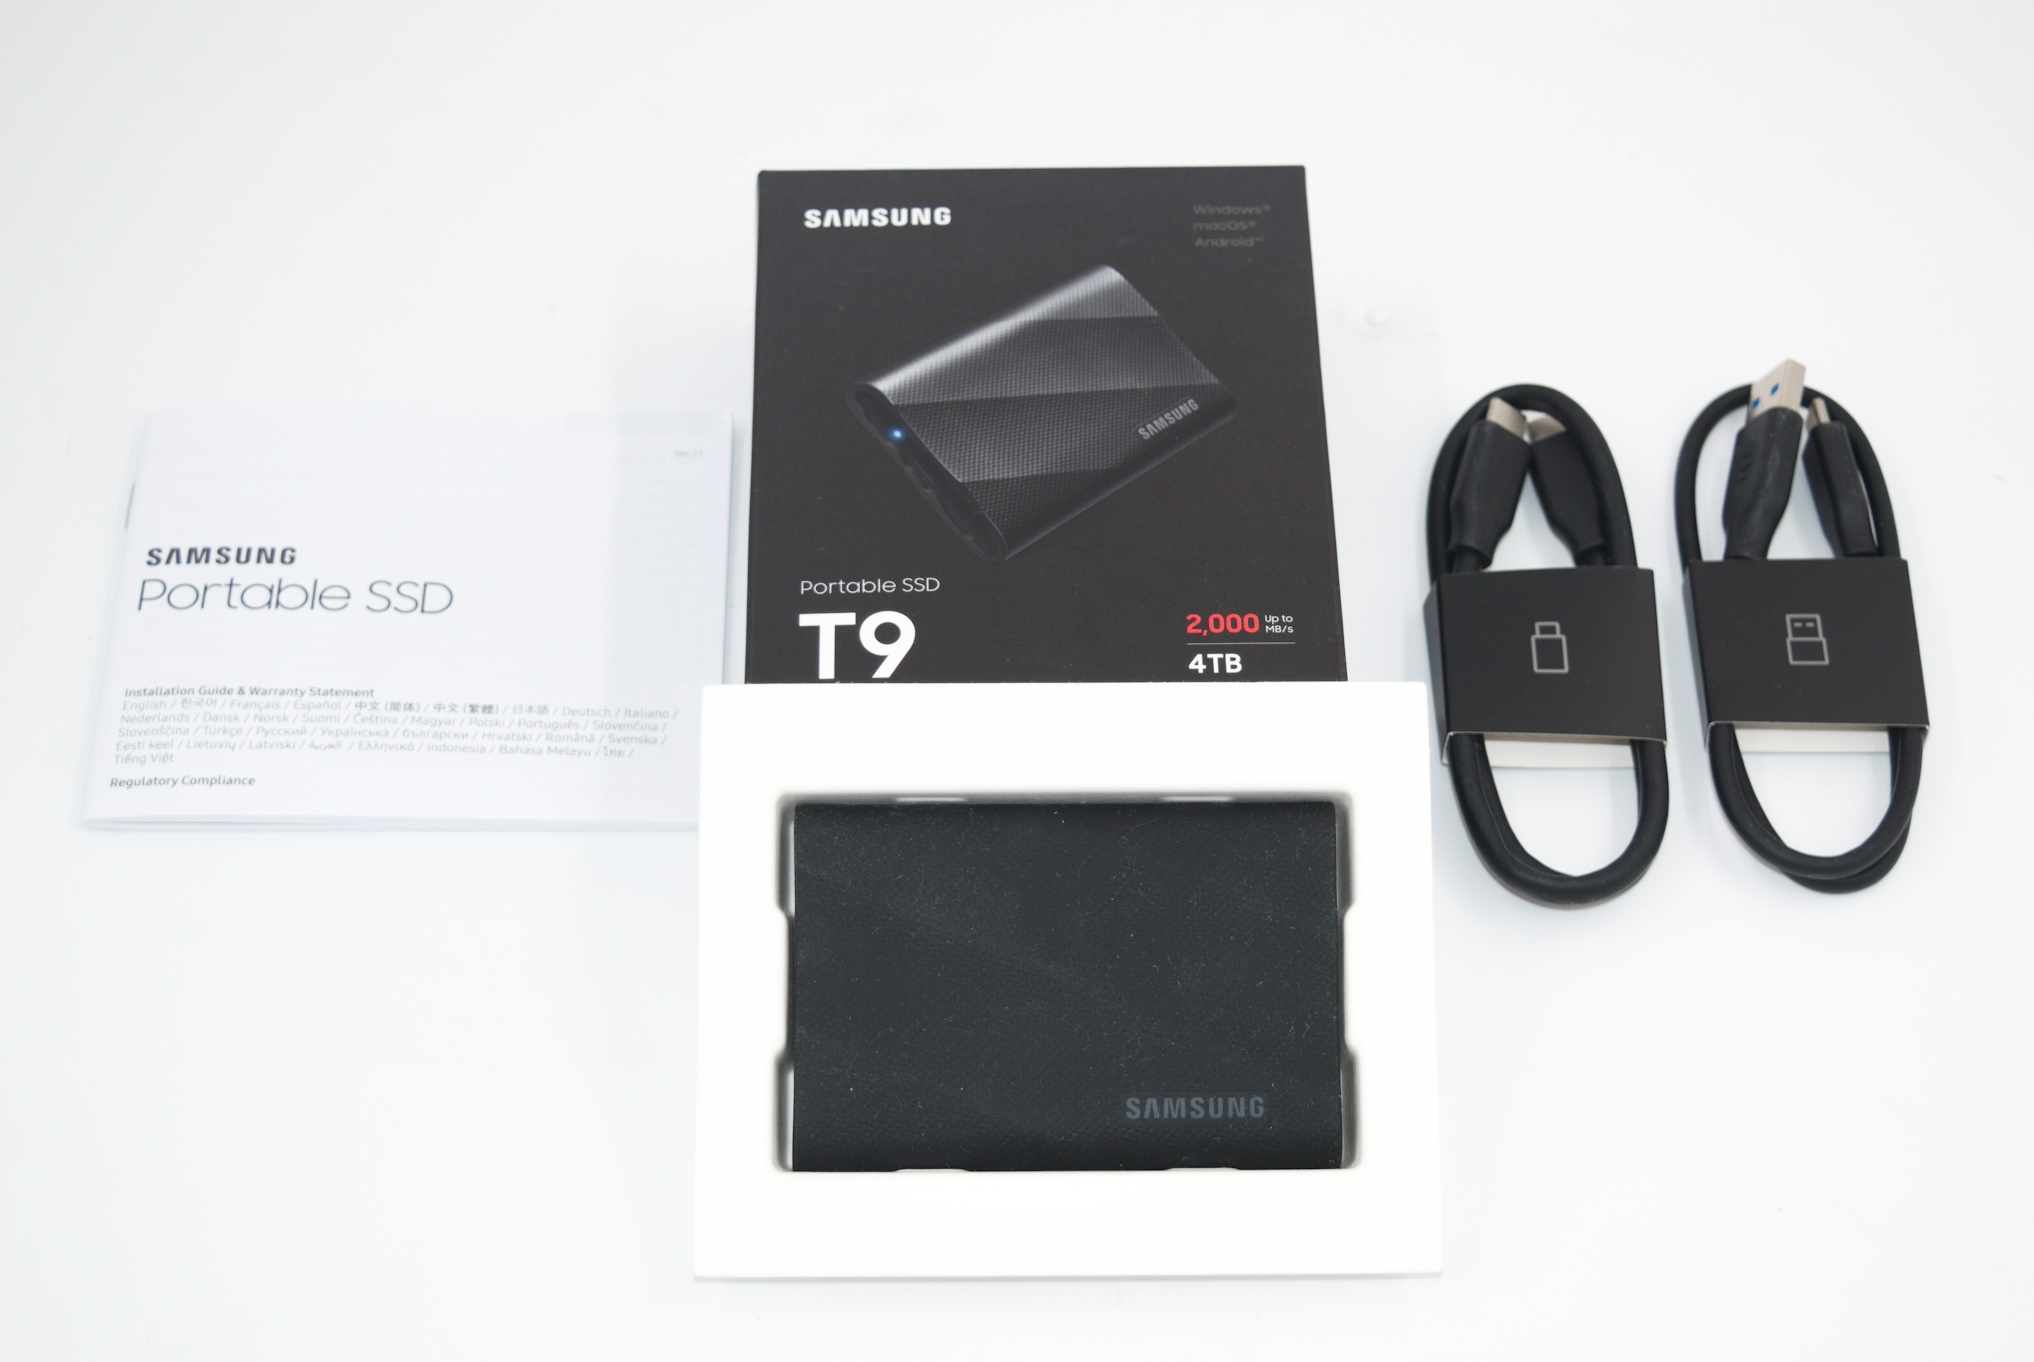 Samsung Portable SSD T9 Review